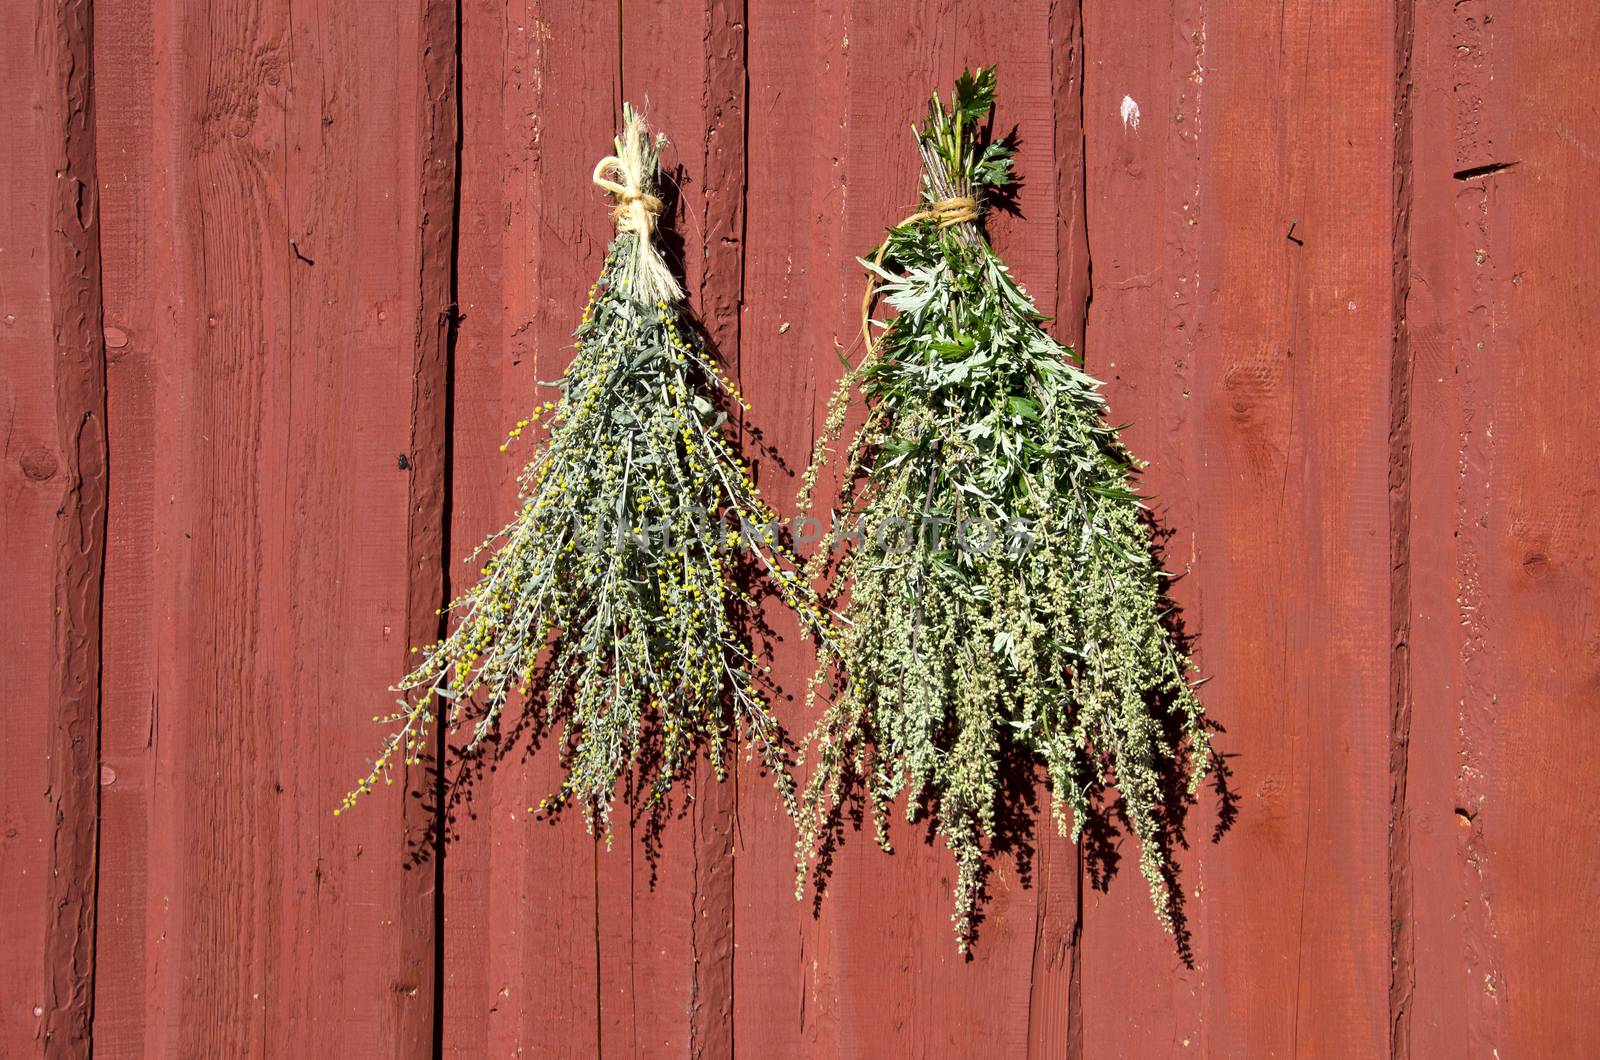 Bundles of fresh herbs hanged to dry  on wooden wall by alis_photo